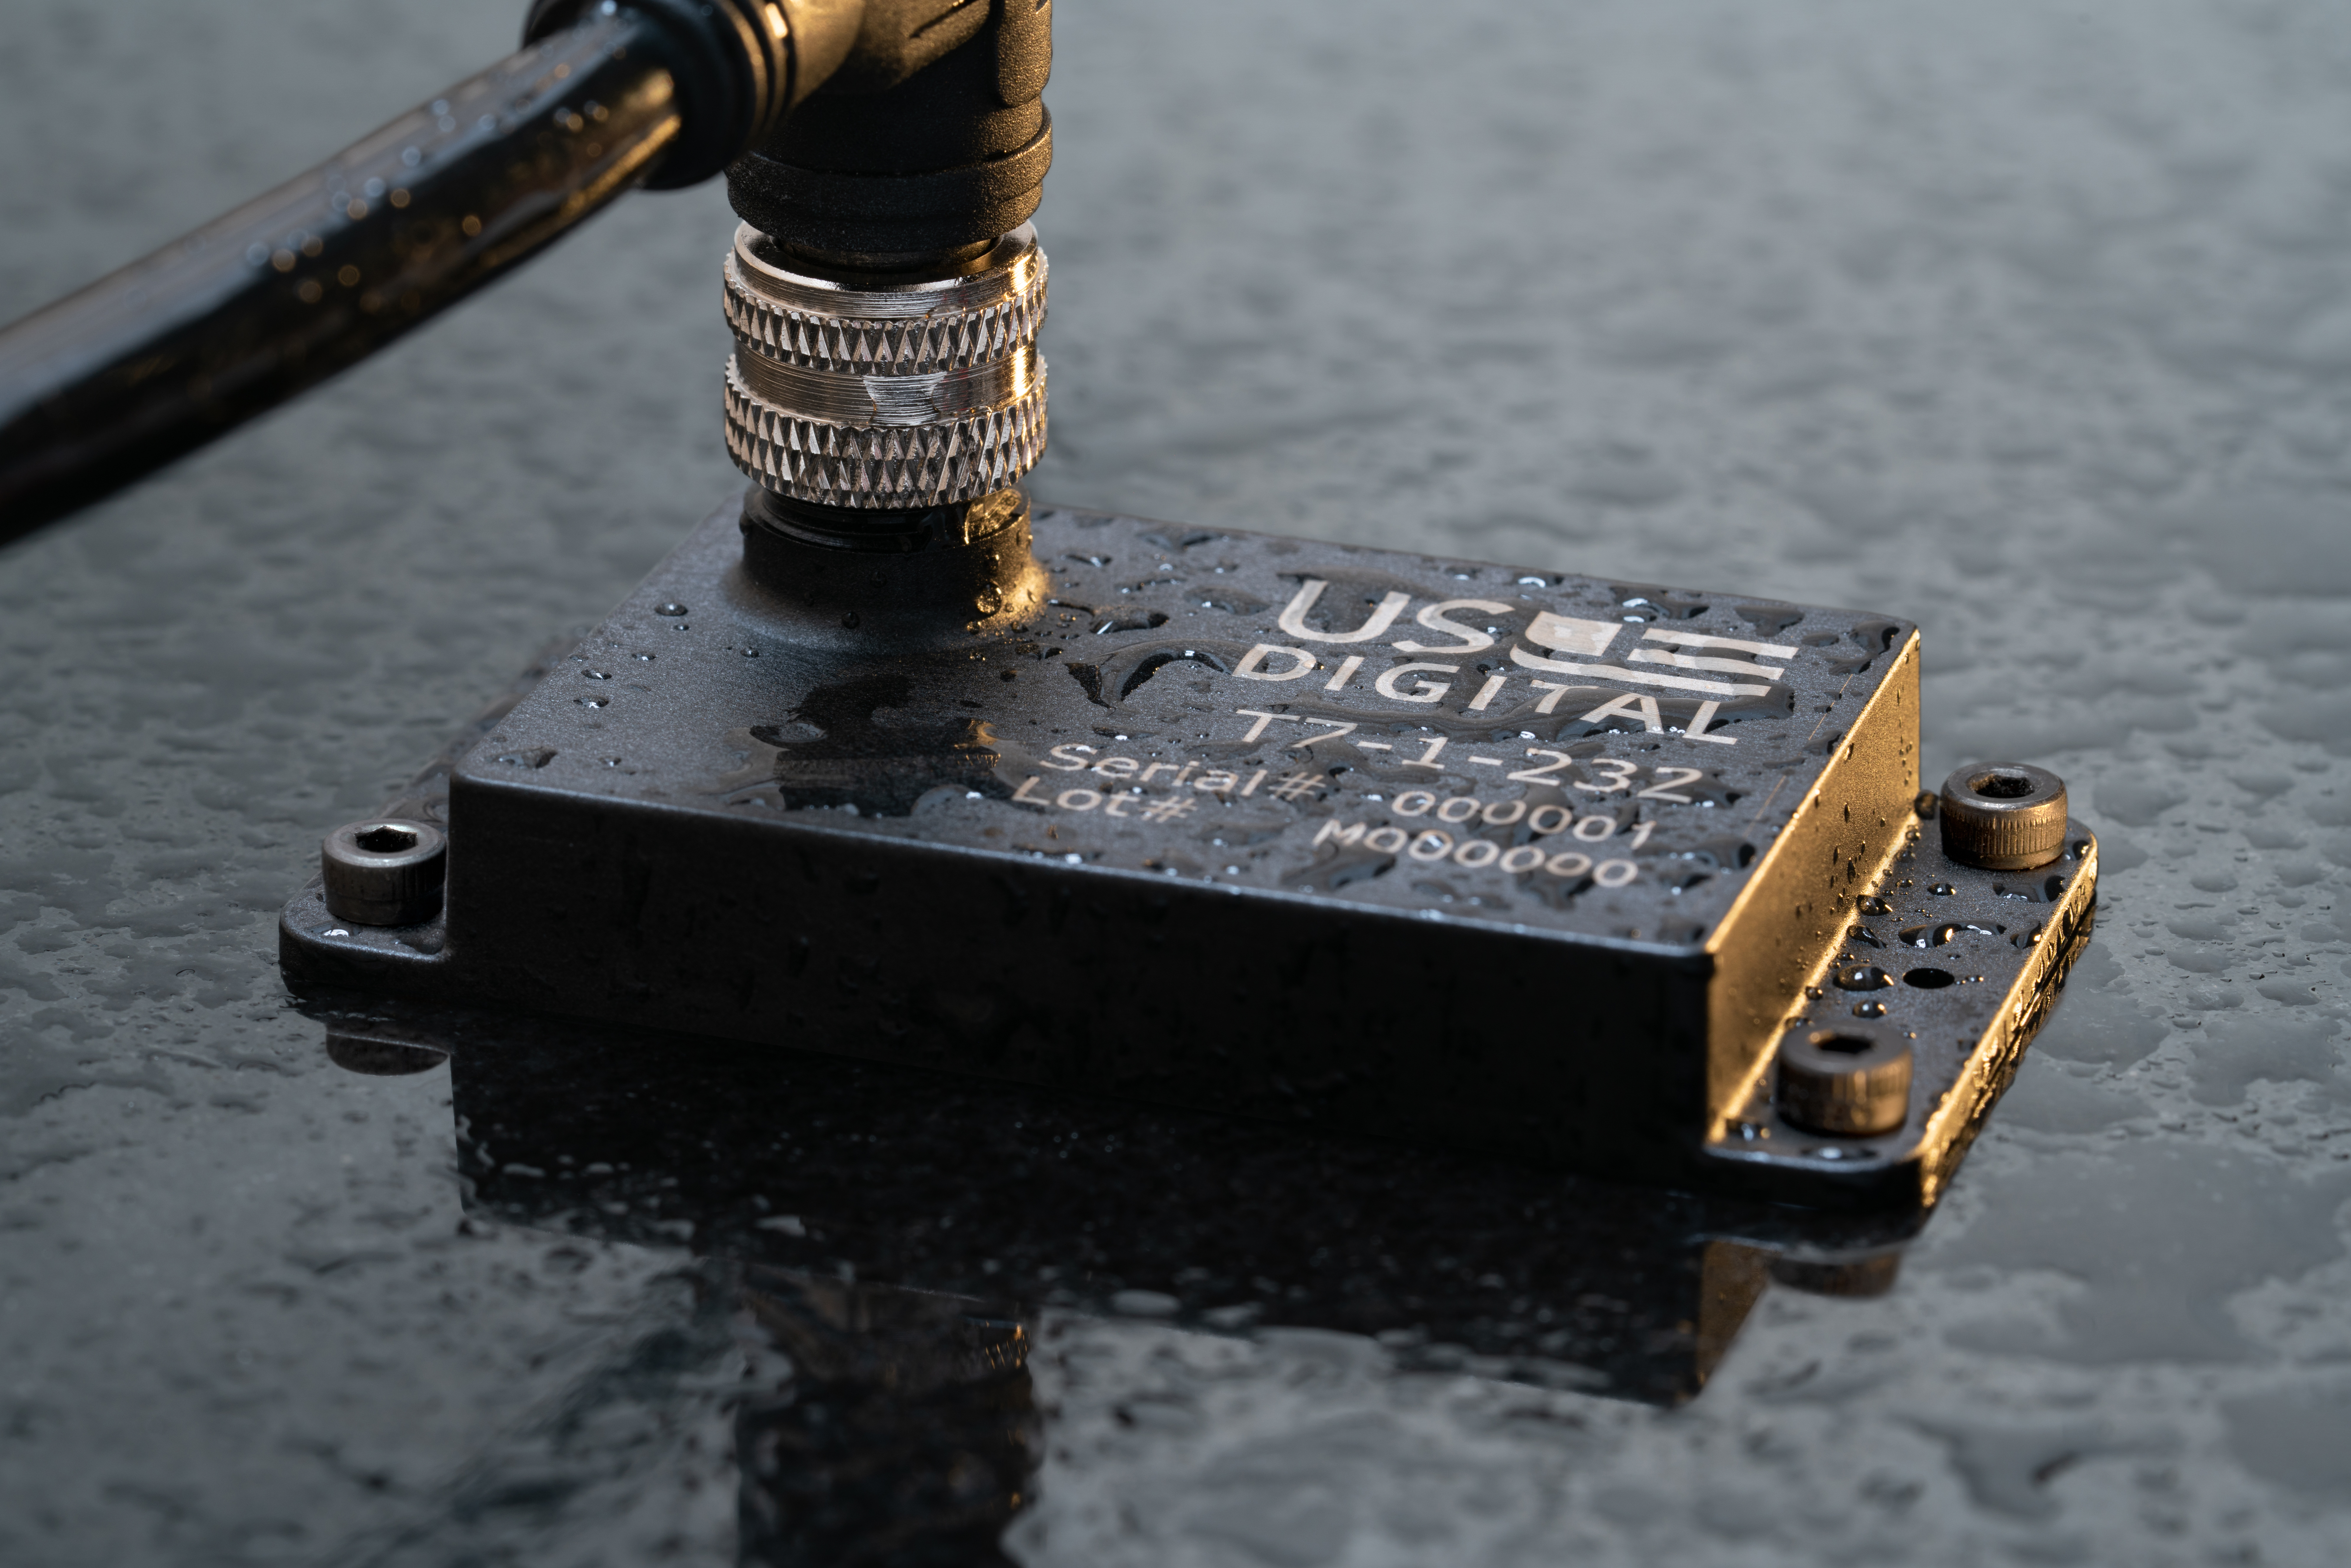 US Digital Networked Absolute Inclinometer on a metal surface with condensation